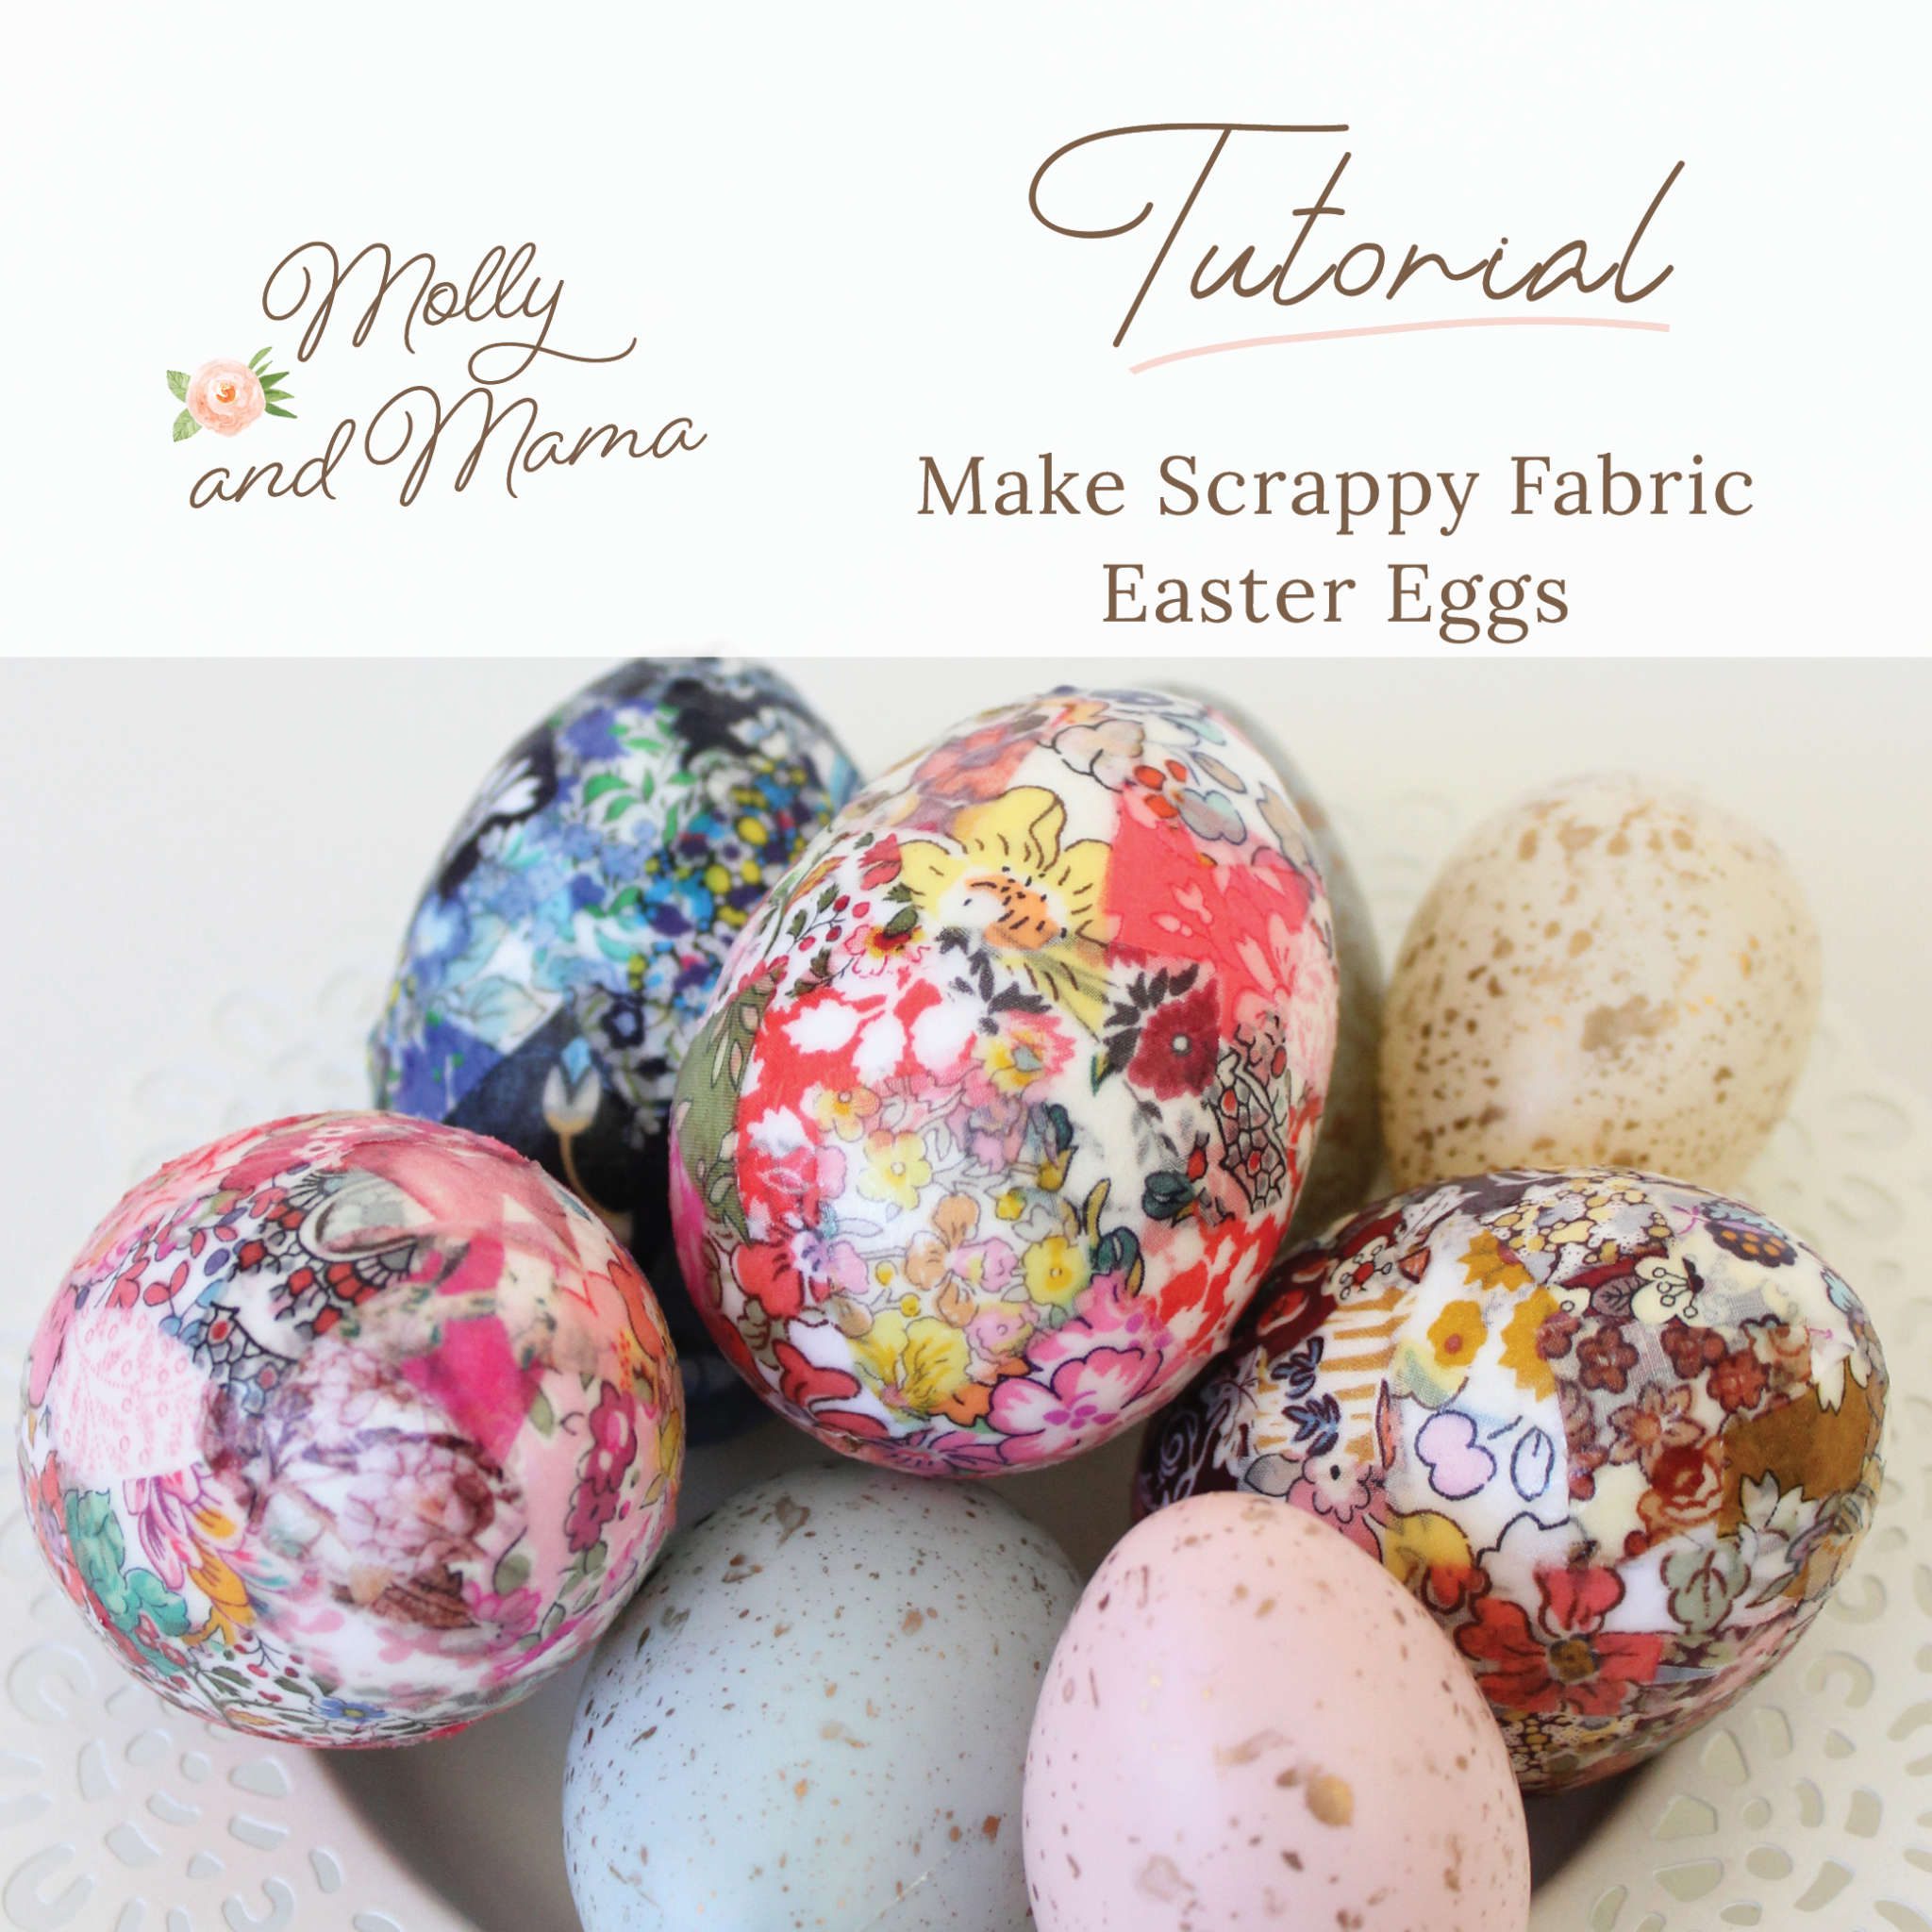 Make Scrappy Fabric Covered Easter Eggs